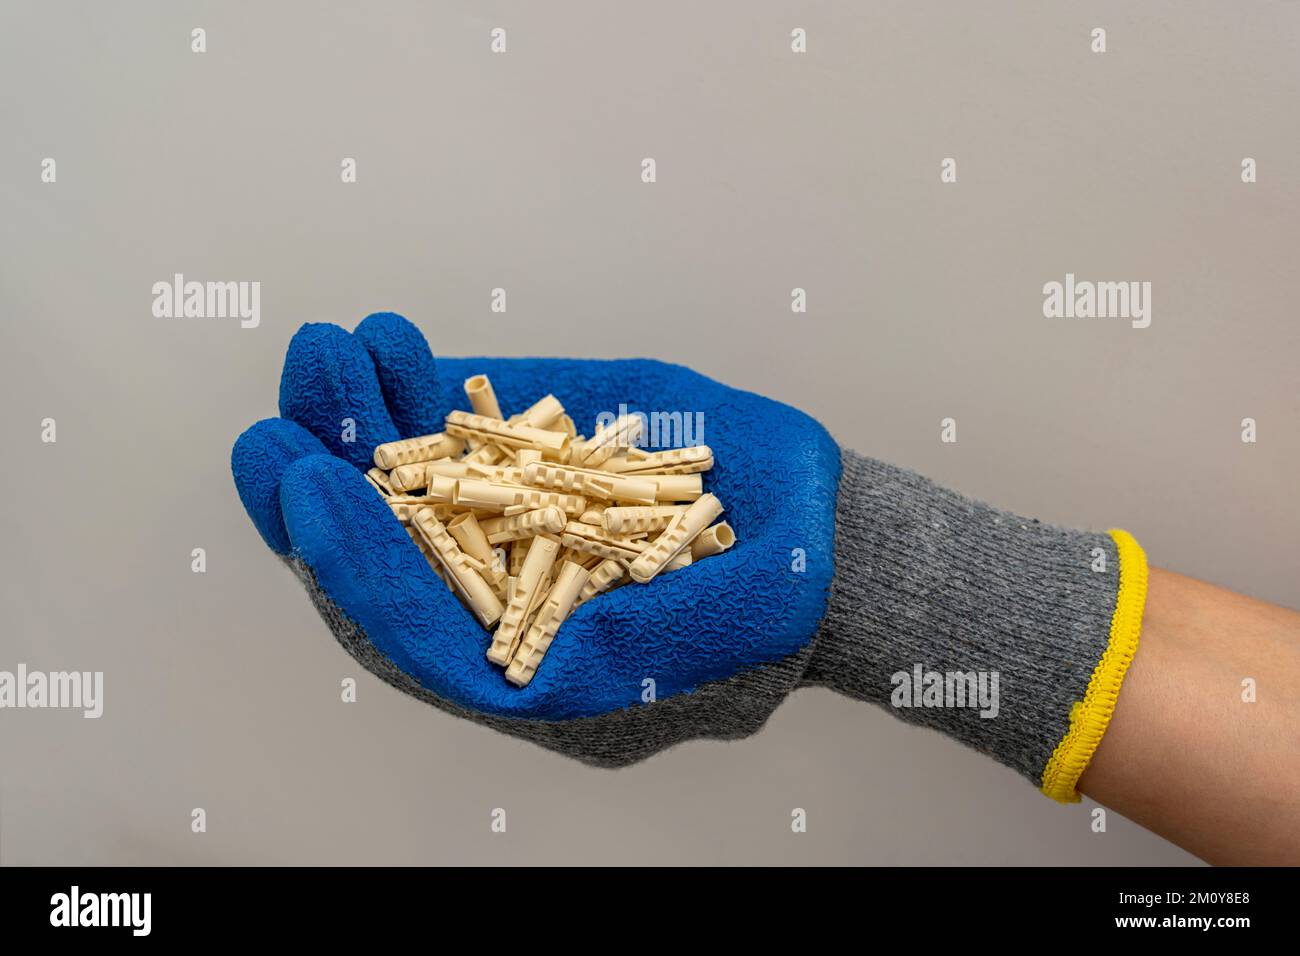 A worker's hand in a protective glove holds a bunch of plastic dowel pins Stock Photo